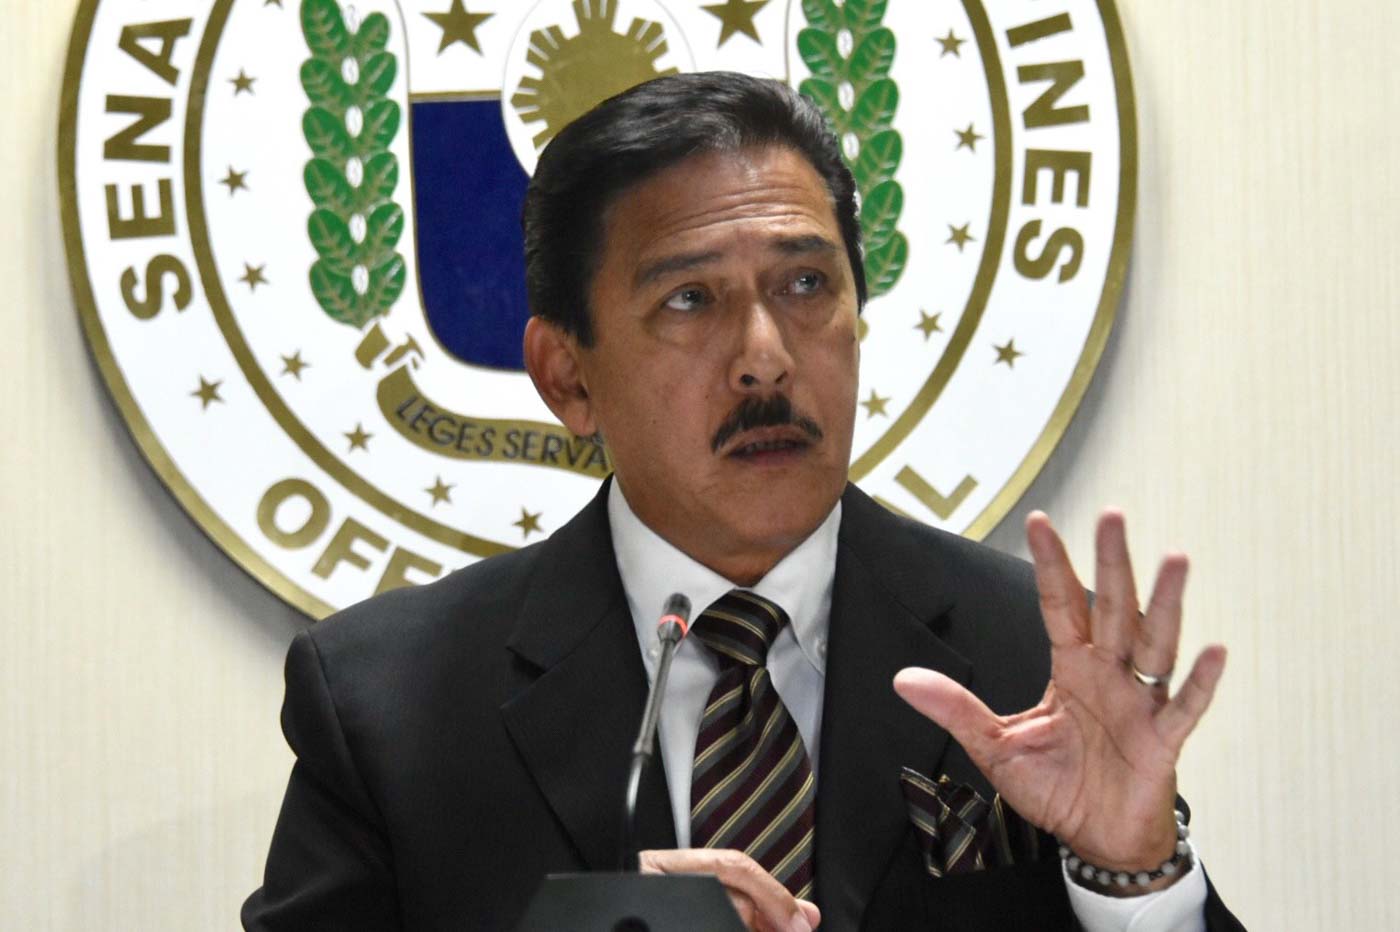 CHINA. Senate President Vicente Sotto III, citing high-level talks, says Beijing recognizes that the West Philippine Sea belongs to Manila. Photo by Angie de Silva/Rappler  